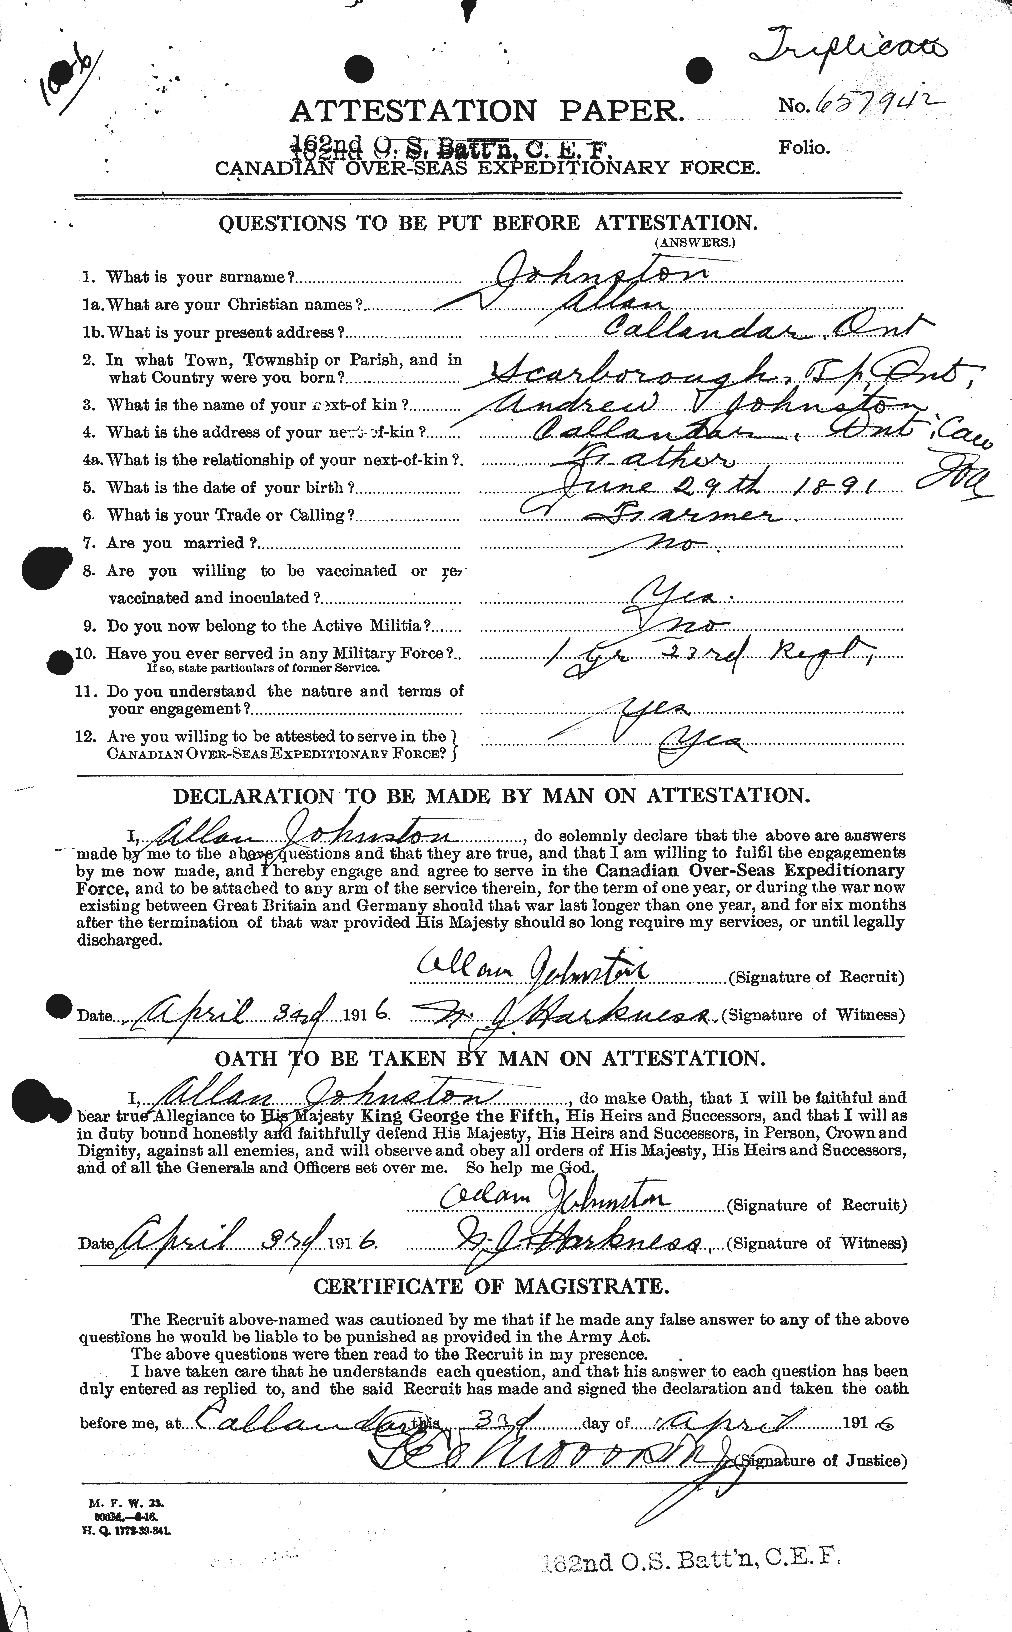 Personnel Records of the First World War - CEF 420997a